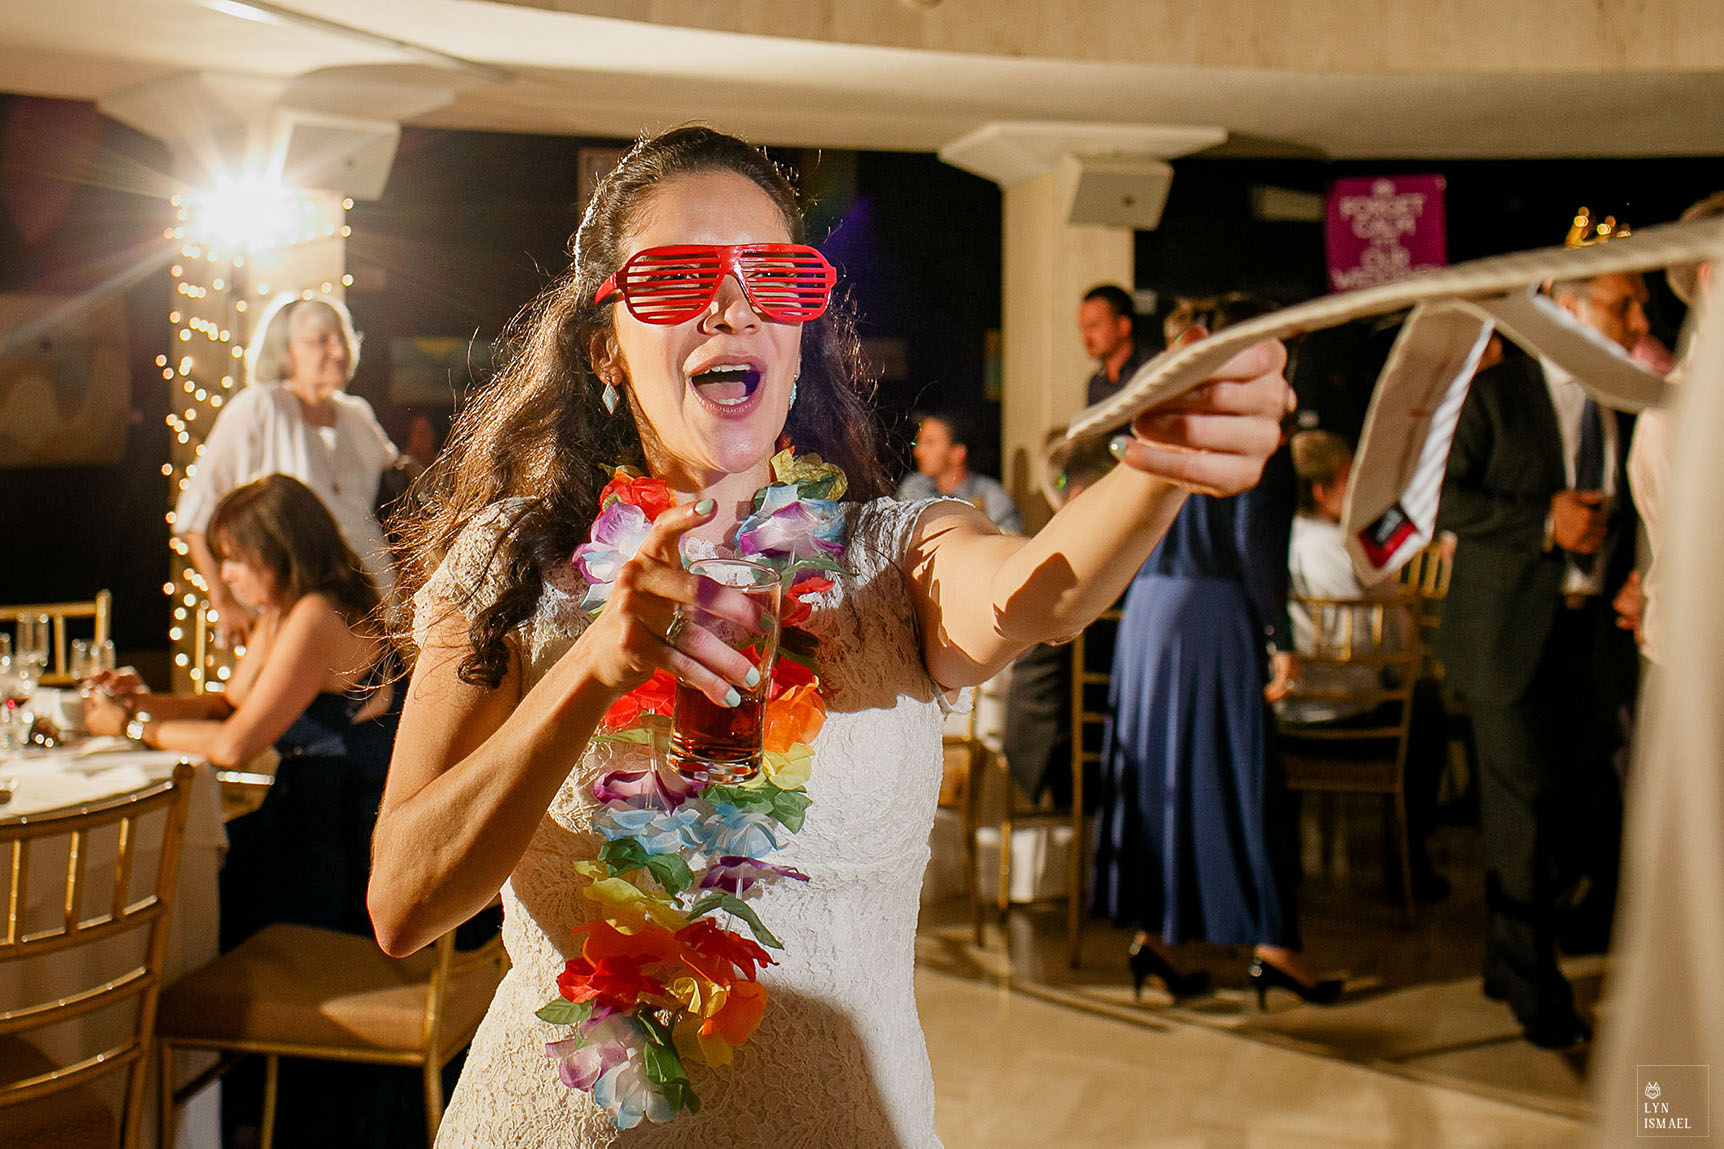 Bride wearing floral leis and red sunglasses grabs her groom on the dance floor with his tie at their Columbus Event Centre wedding.